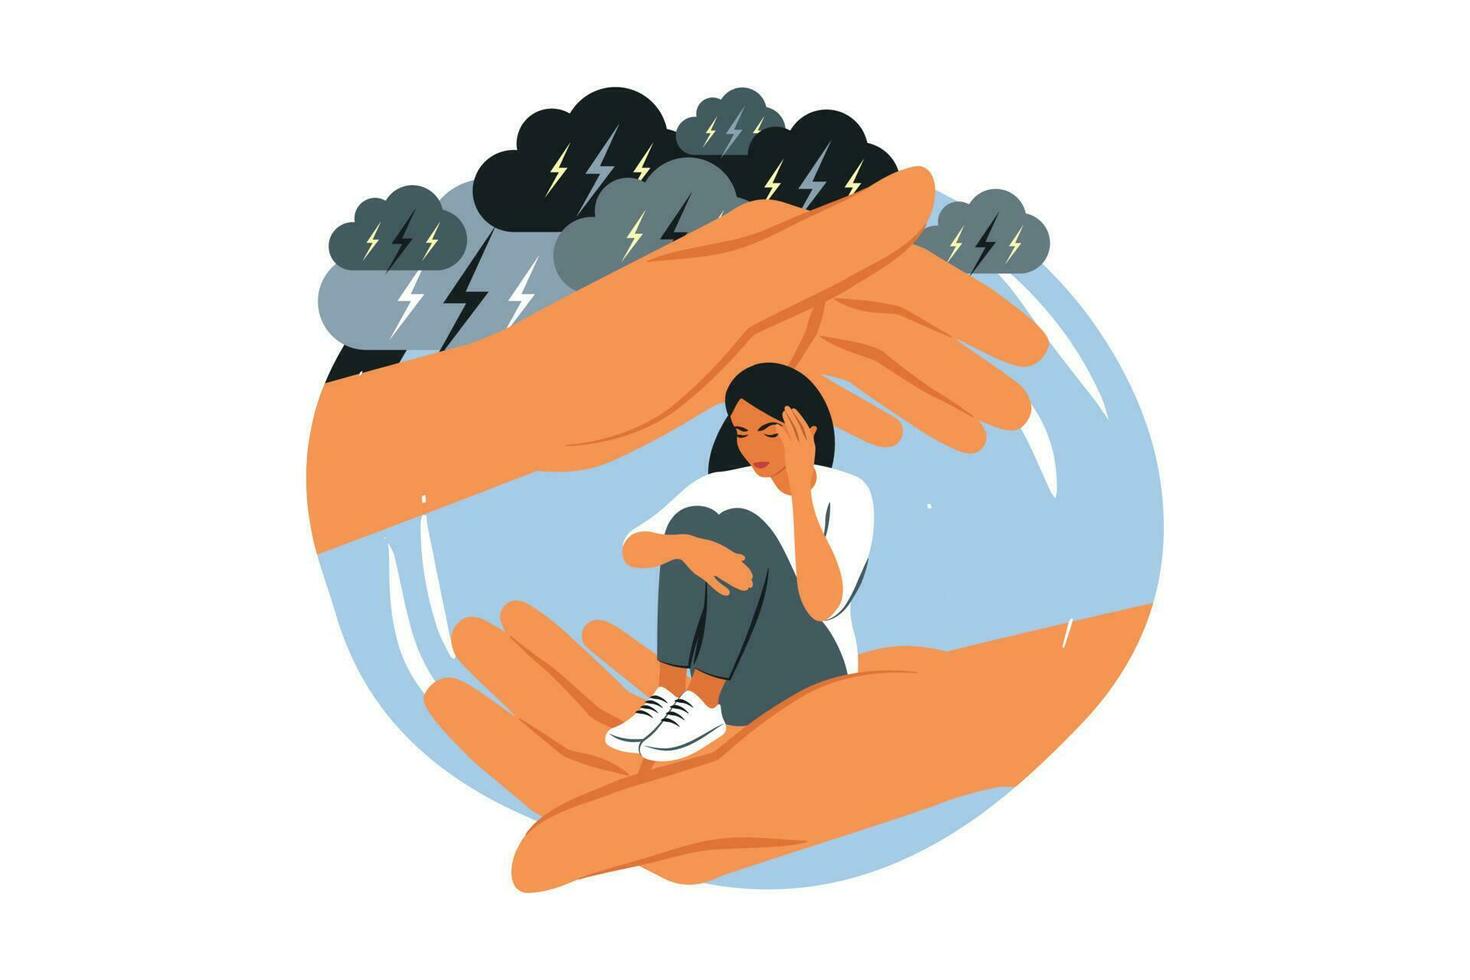 Self care, love, acceptance concept. Woman with closed eyes sitting embracing knees. Mental health issue, depression, feeling of frustrated, anxiety. Vector illustration.